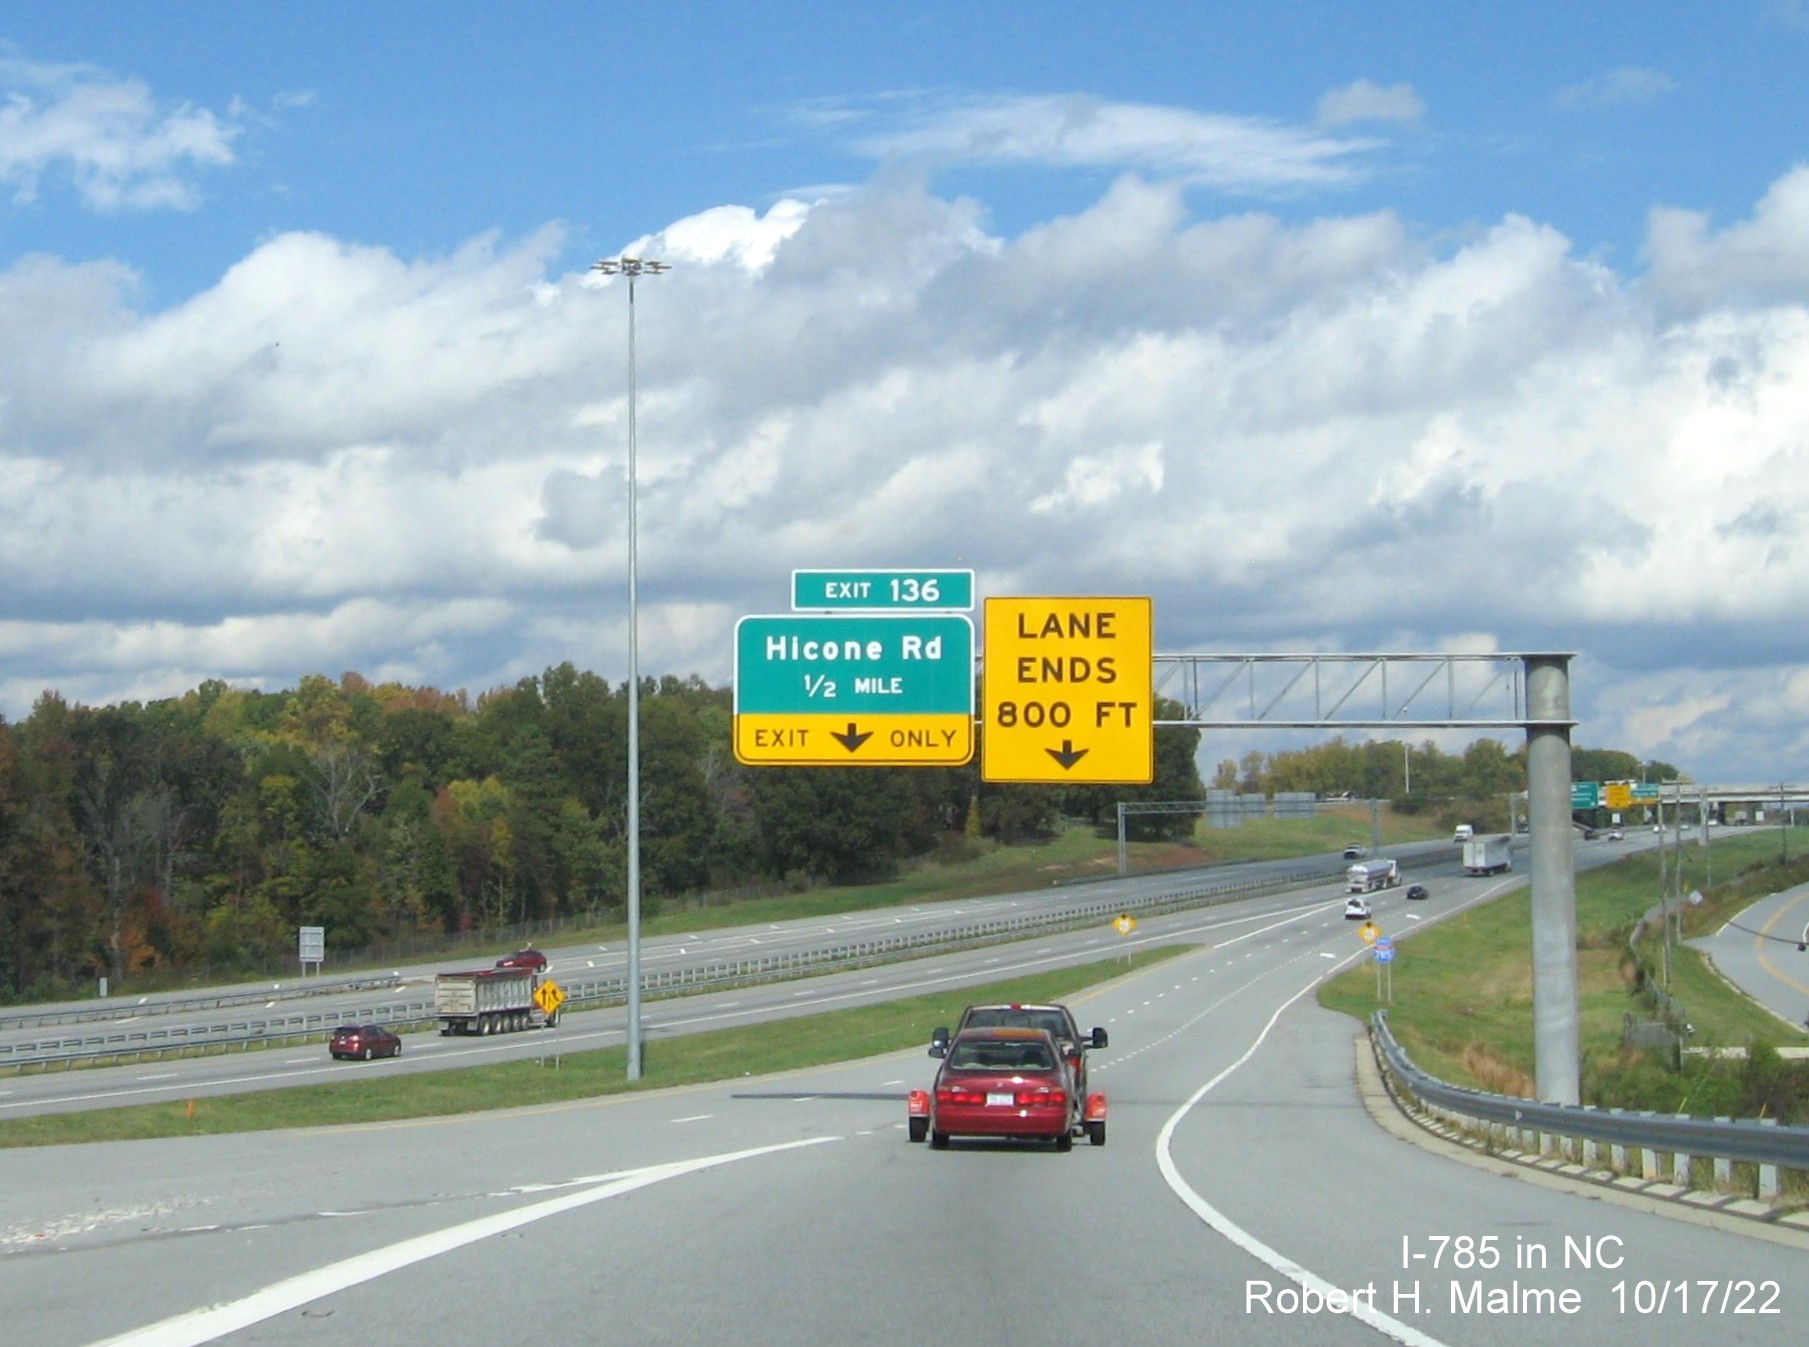 Image of 1/2 mile advance overhead sign for Hicone Road section on ramp from
      I-785 North/Greensboro Urban Loop to US 29 North, October 2022